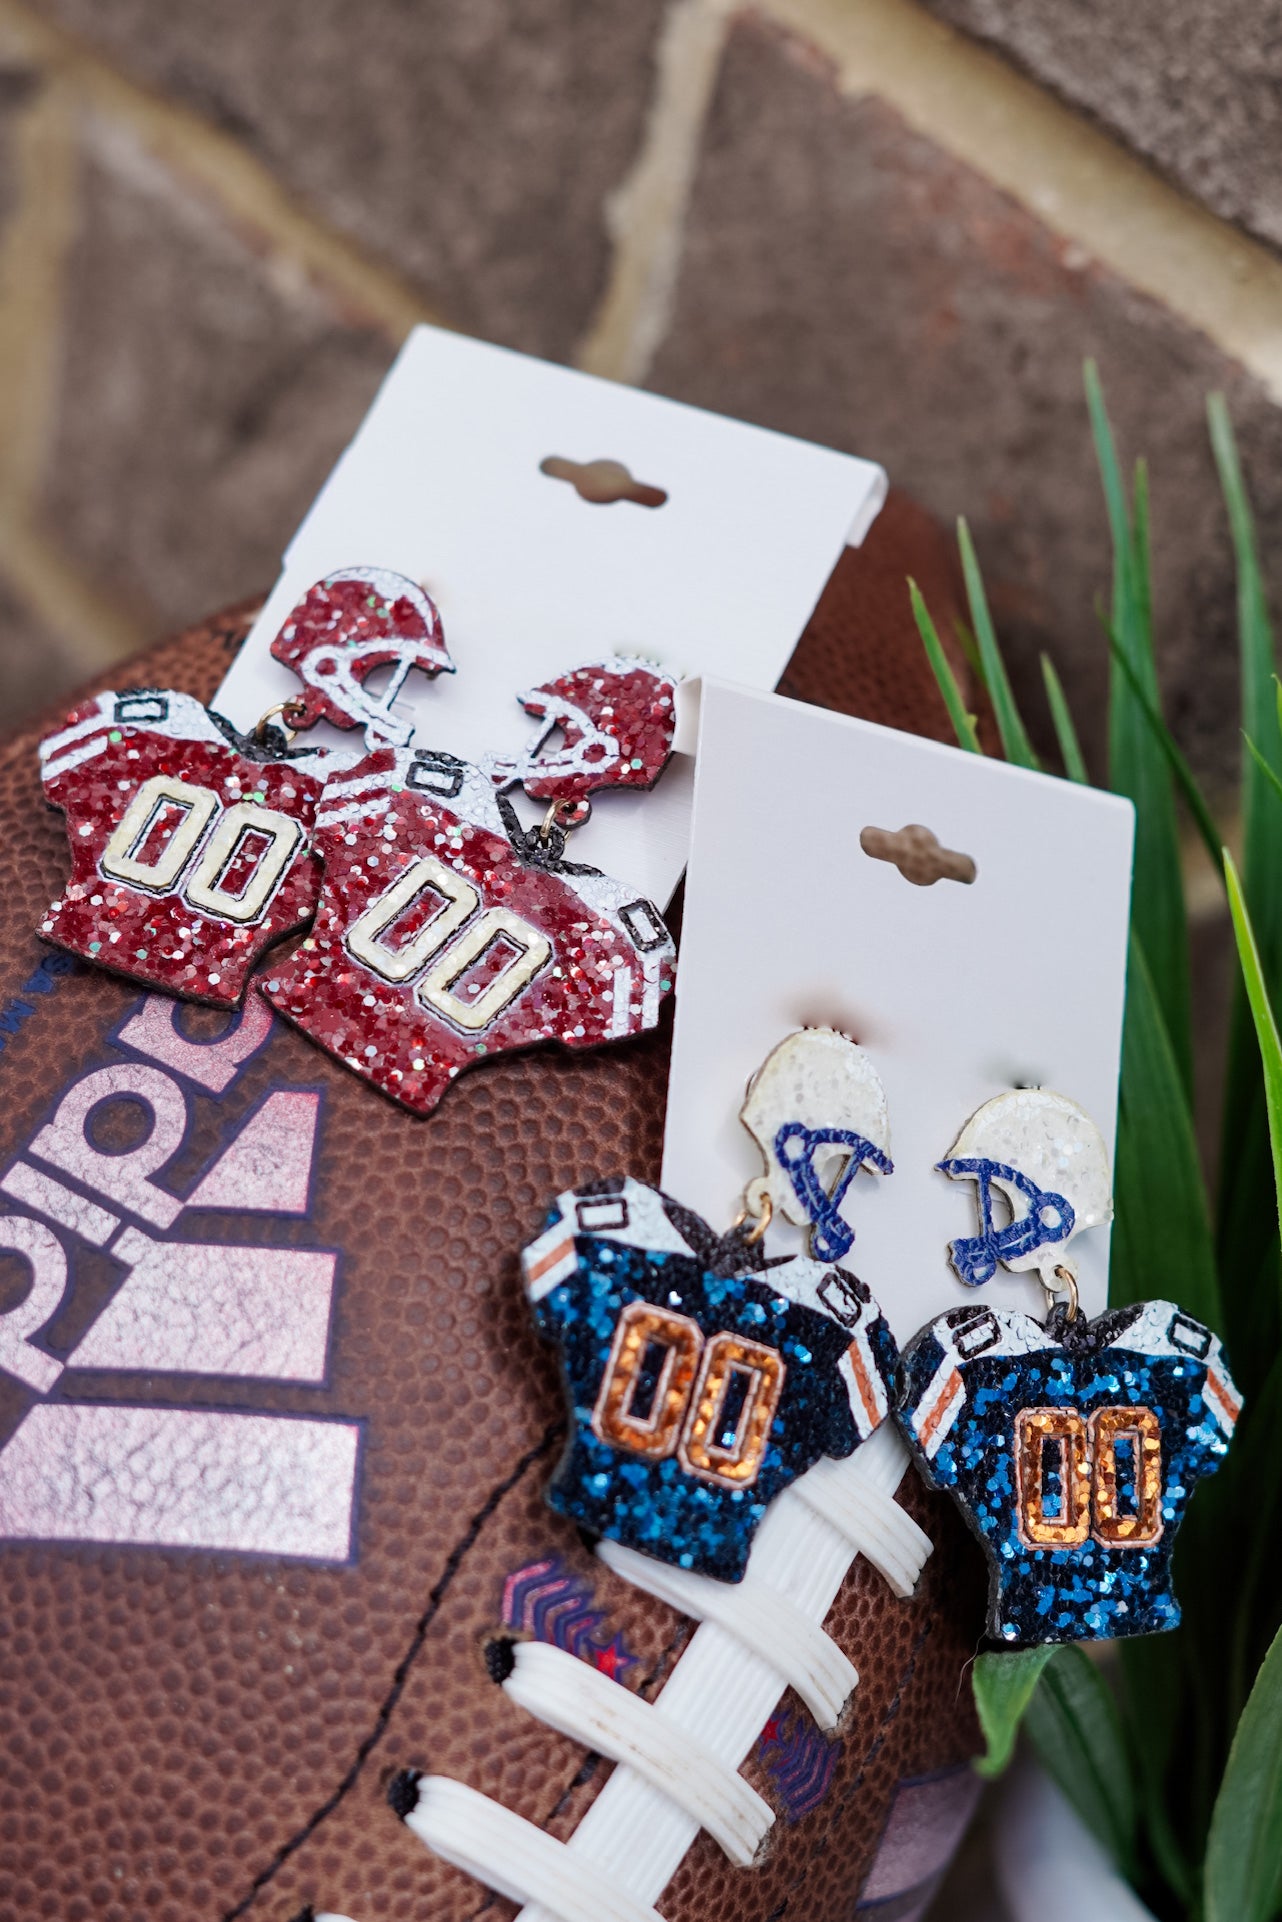 Friday Night Lights are upon us!! Whether you have a son or boyfriend on the field, or you're watching on the Big Screen TV in your living room, represent your team with the "Gear Up" Jersey Earrings!!  "Gear Up" Jersey Earrings Crimson/White and Navy/Orange Stud Post Back. Red/white sequin jersey with football helmet on the post. Navy/orange sequin jersey with football helmet on the post.